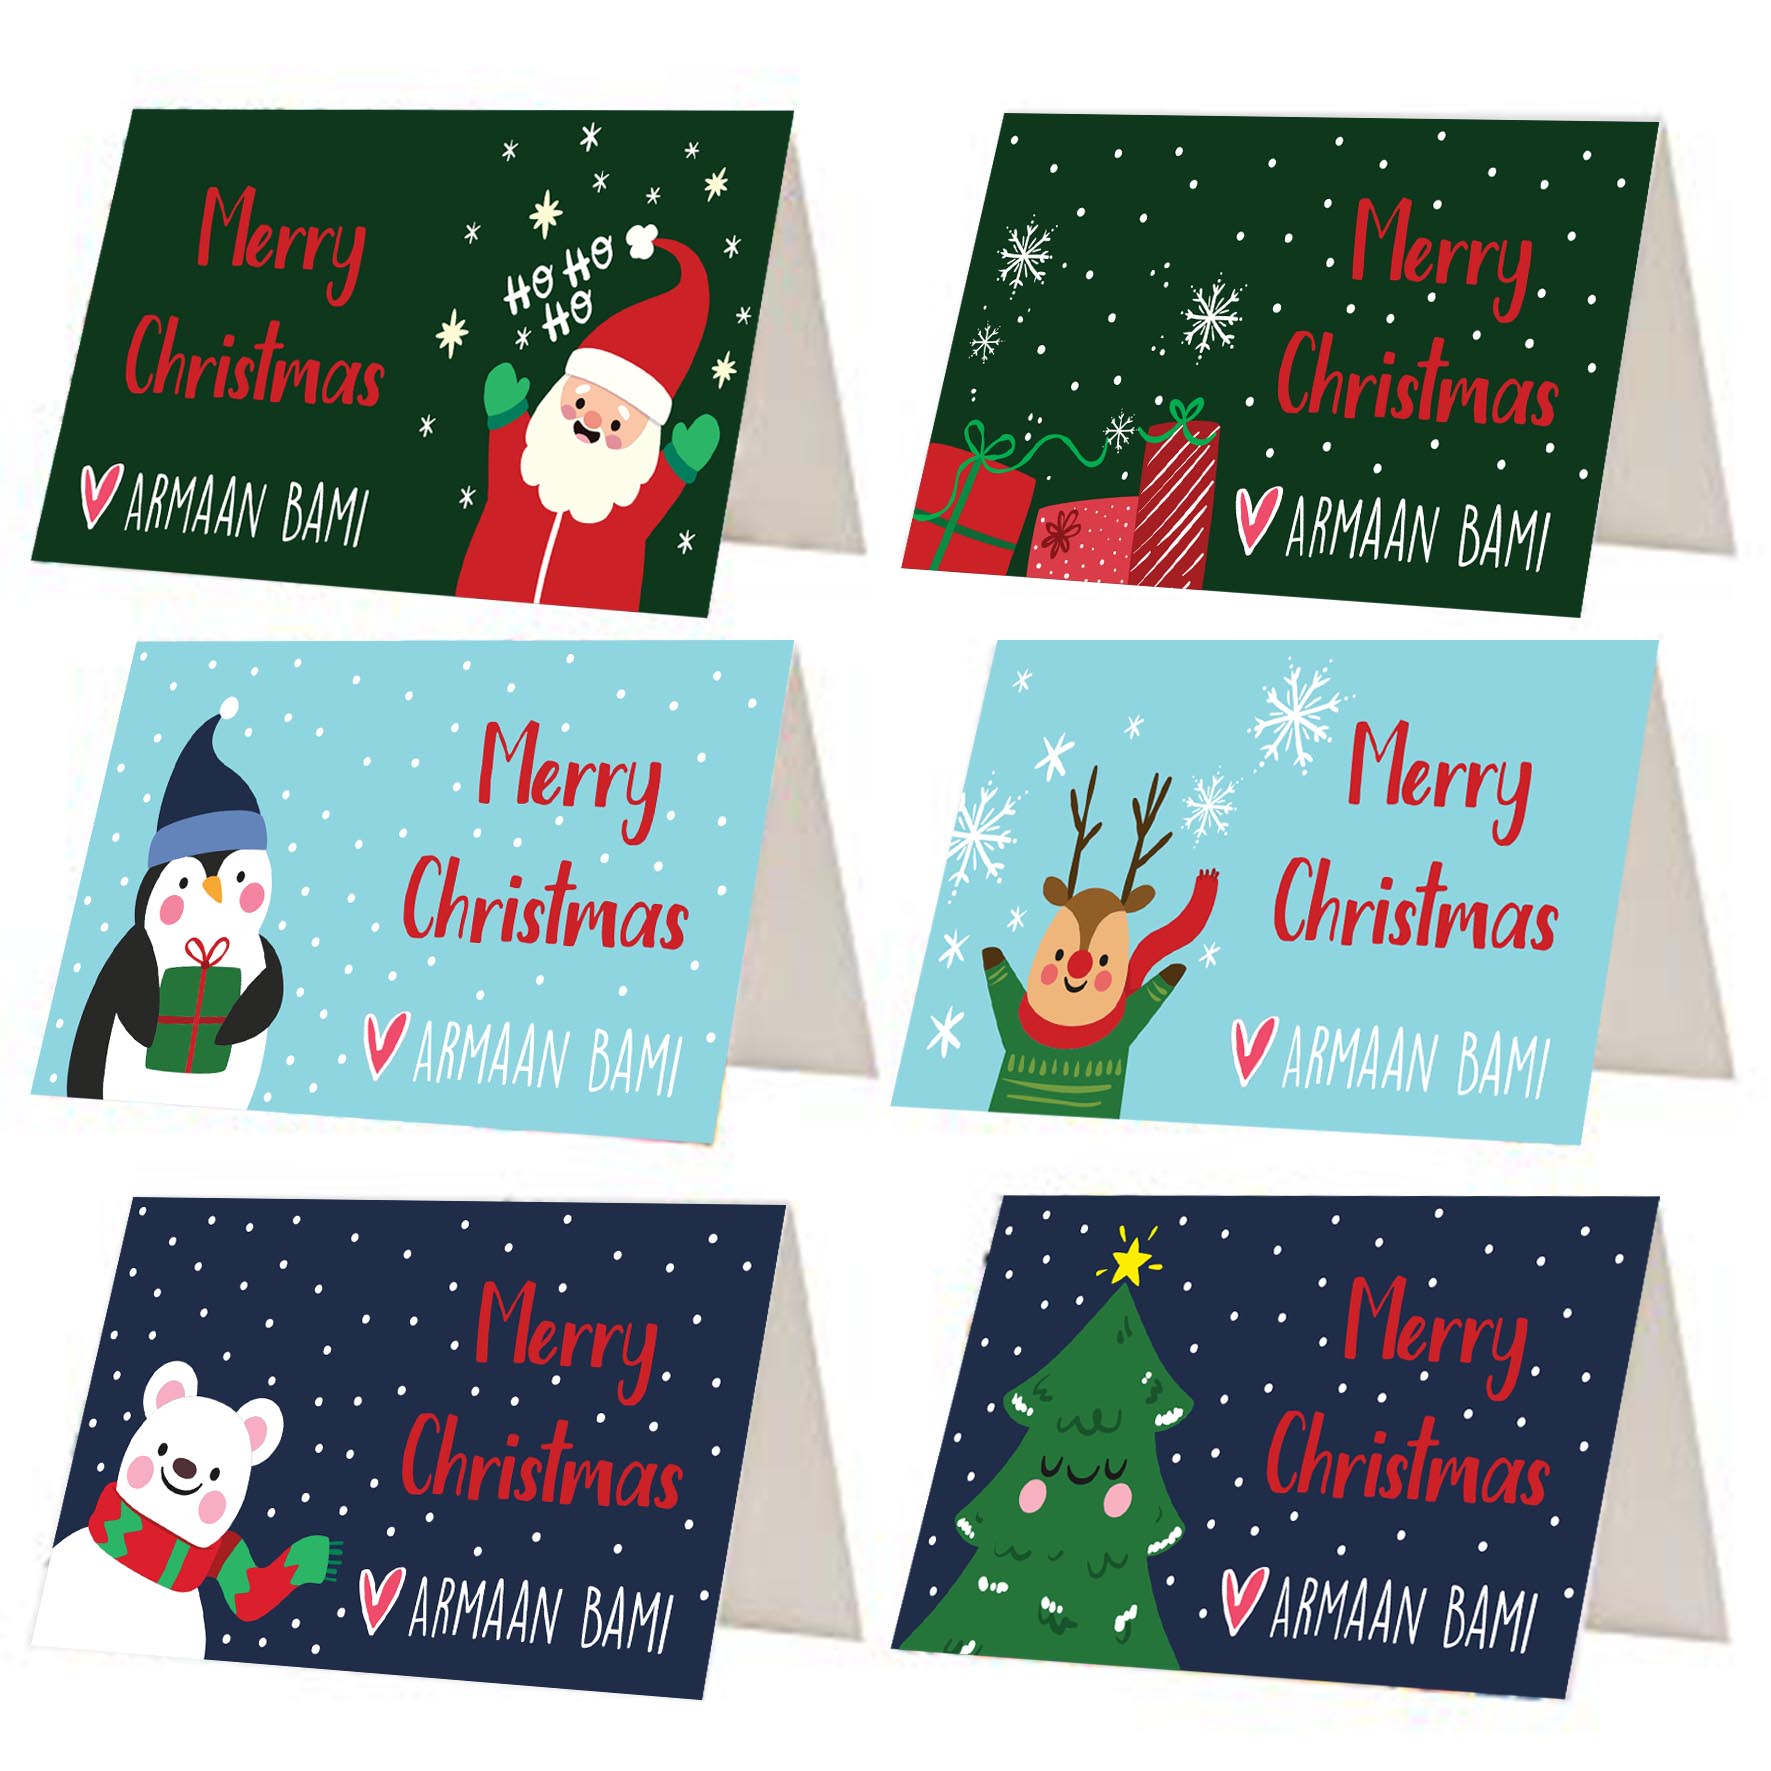 Urbanhand urban hand Personalise Colourful Christmas gift tags season santa teddy bears snowman candy cane reindeer set of 12 and 24